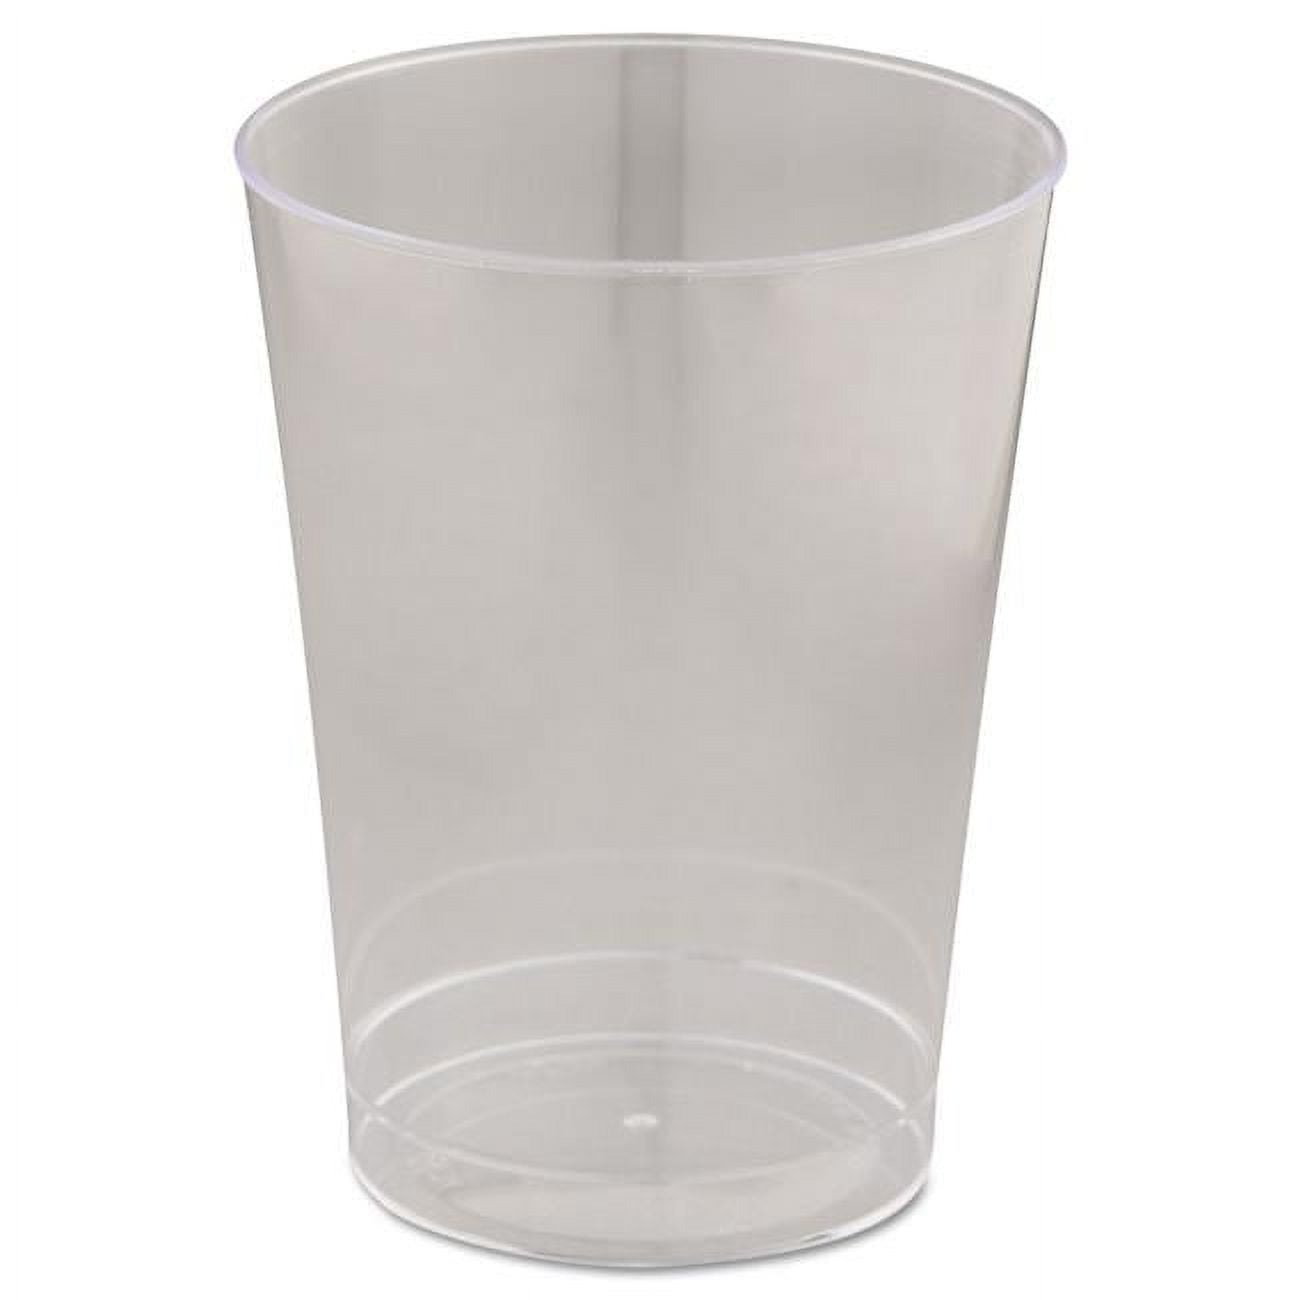 T10 Cpc 10 Oz Tall Plastic Tumblers - Clear, Case Of 500